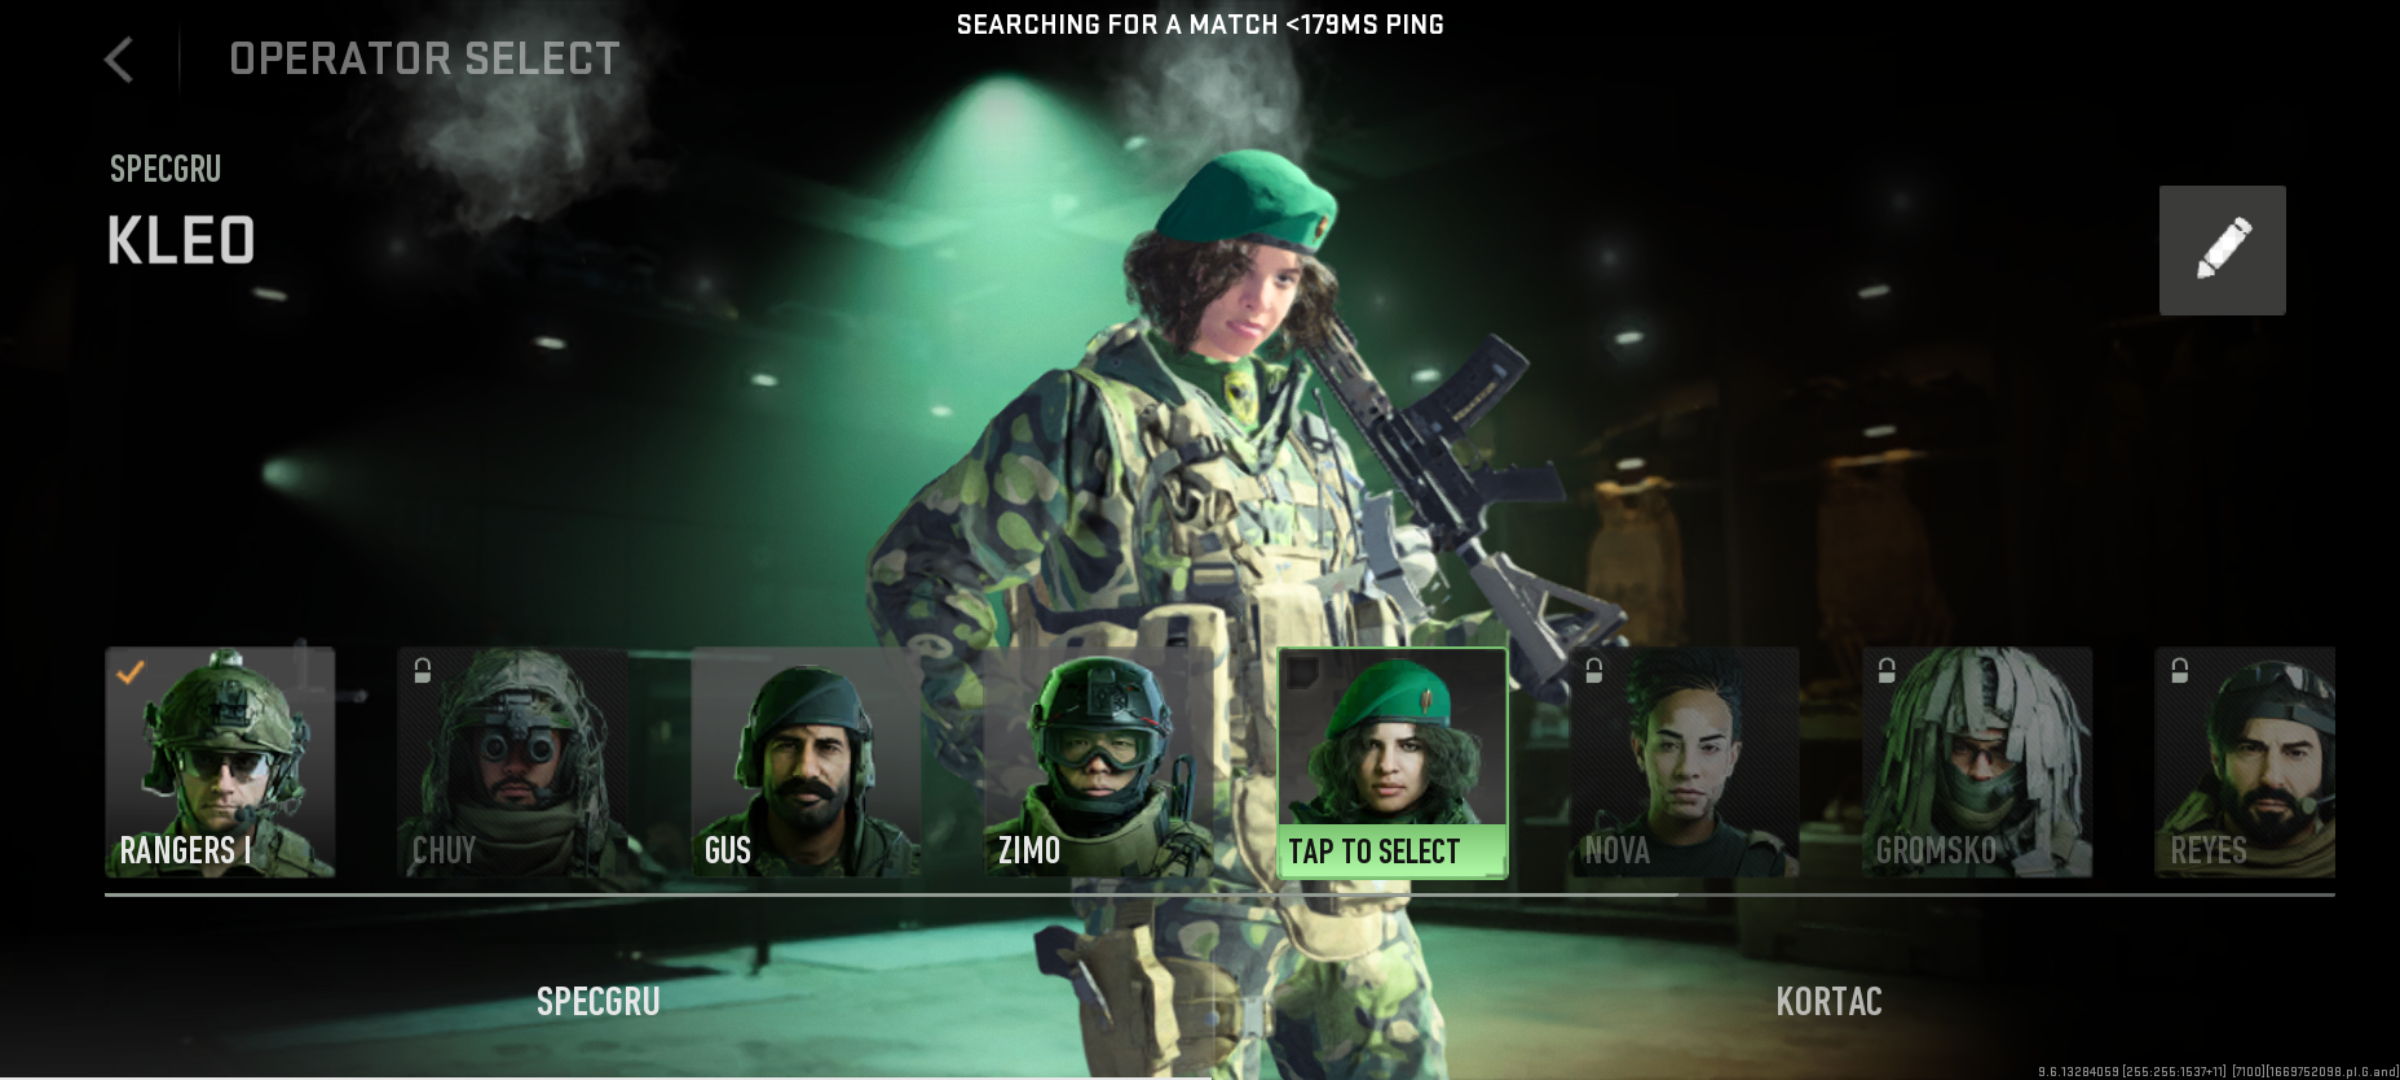 Call of Duty: Warzone Mobile is launching a limited release